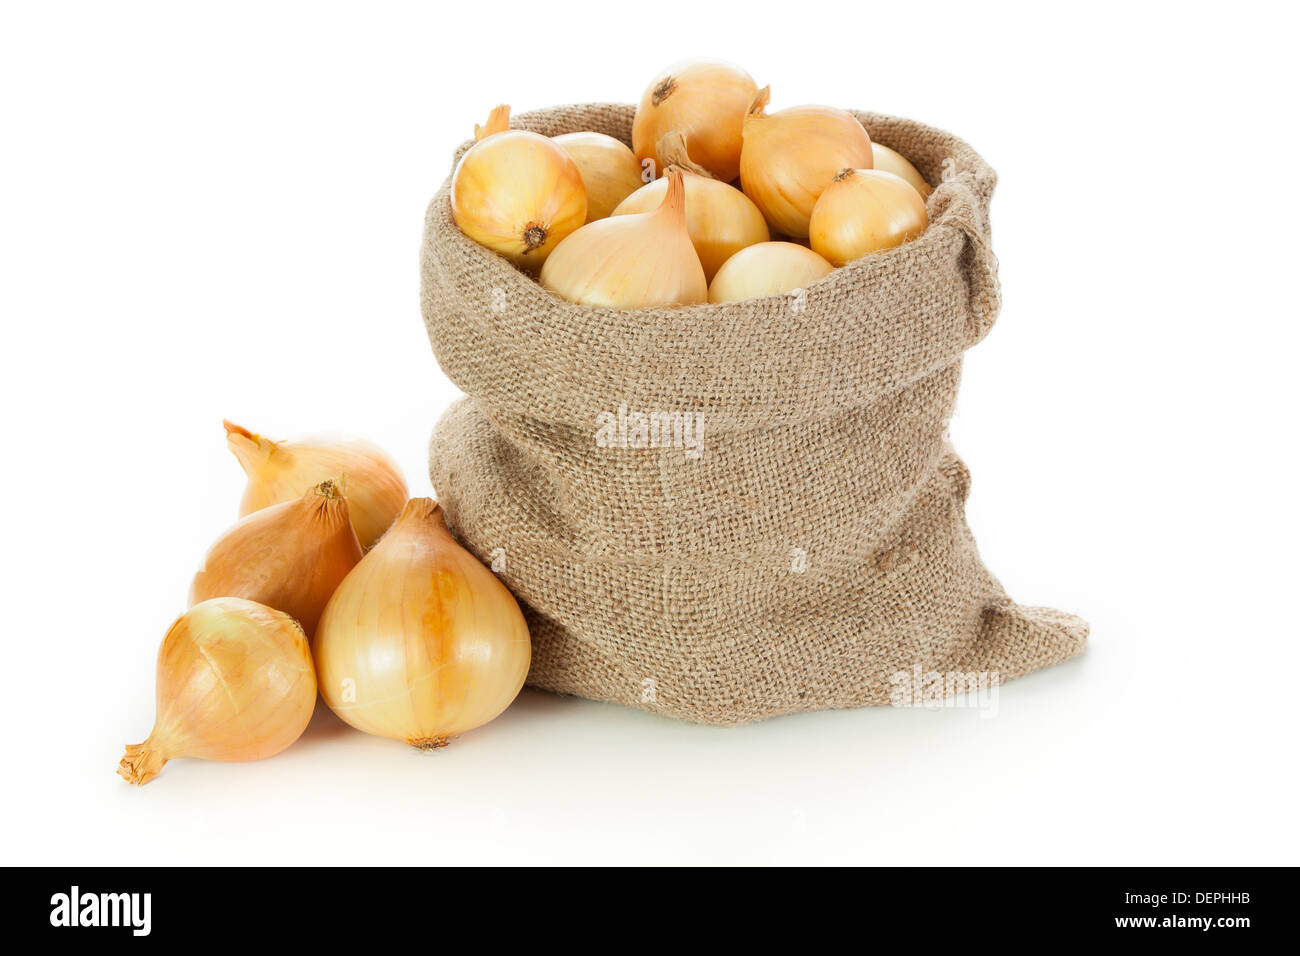 Onions in burlap sack on white background Stock Photo